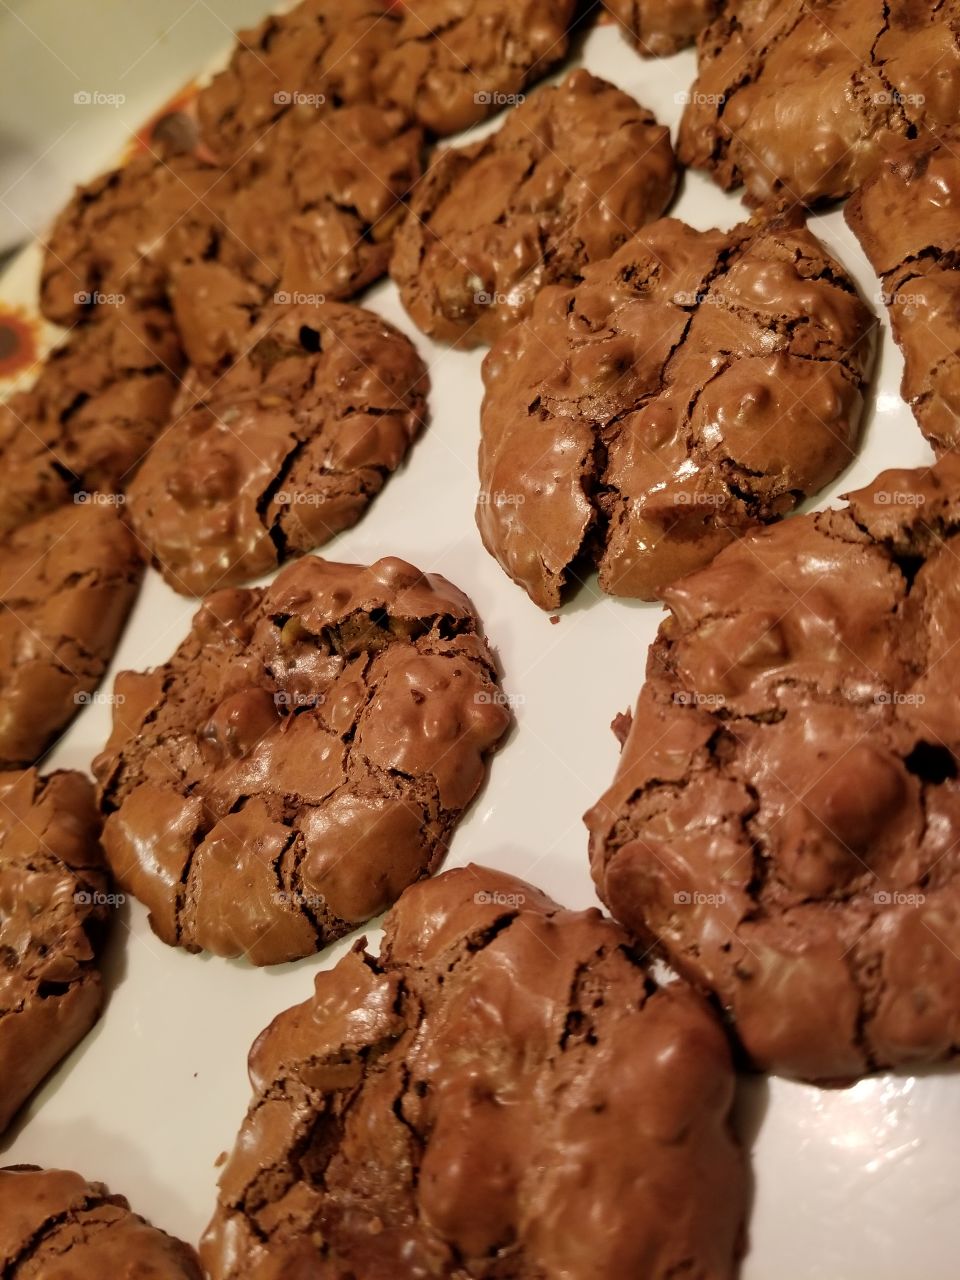 who says gluten free needs to flavor free. These chocolate cookies are completely flour free and a crowd favorite